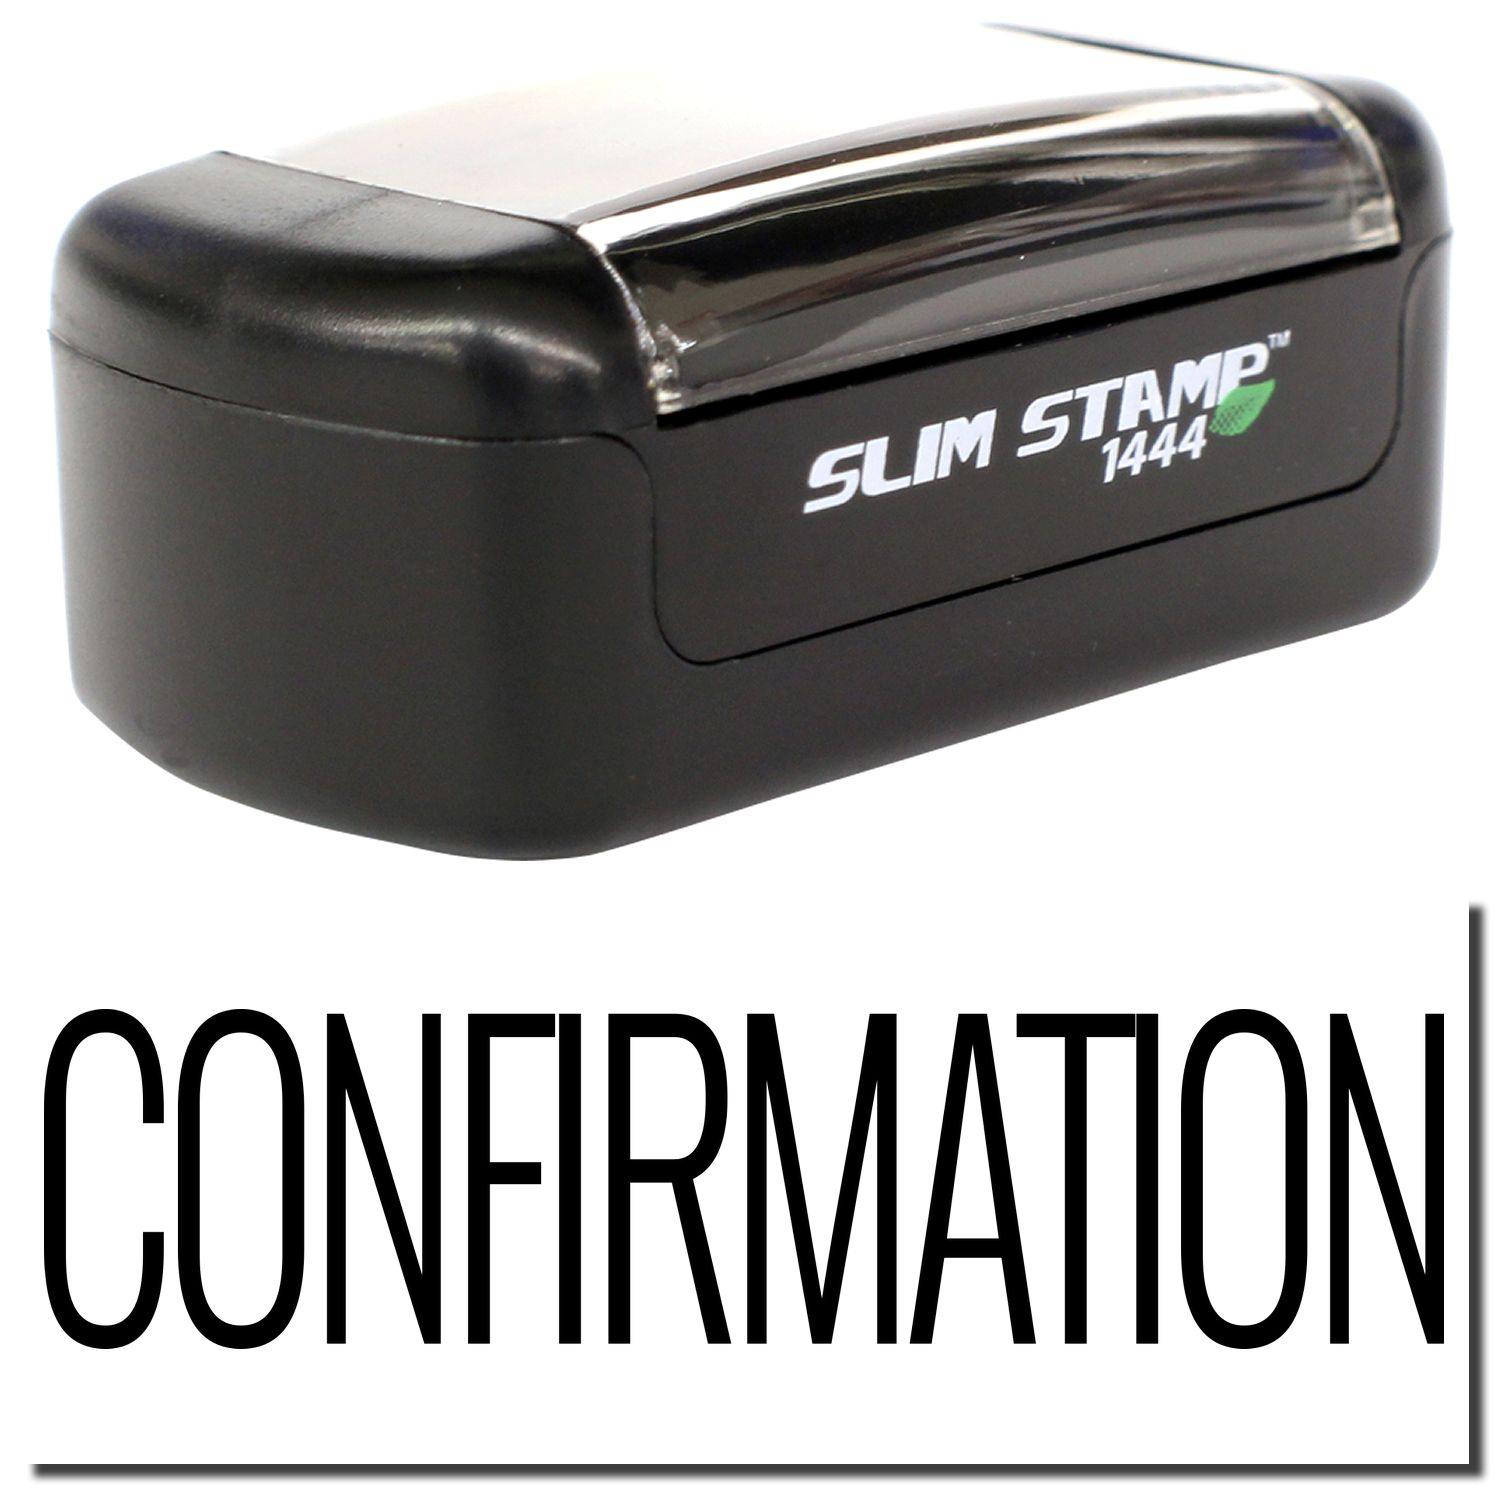 A stock office pre-inked stamp with a stamped image showing how the text "CONFIRMATION" is displayed after stamping.